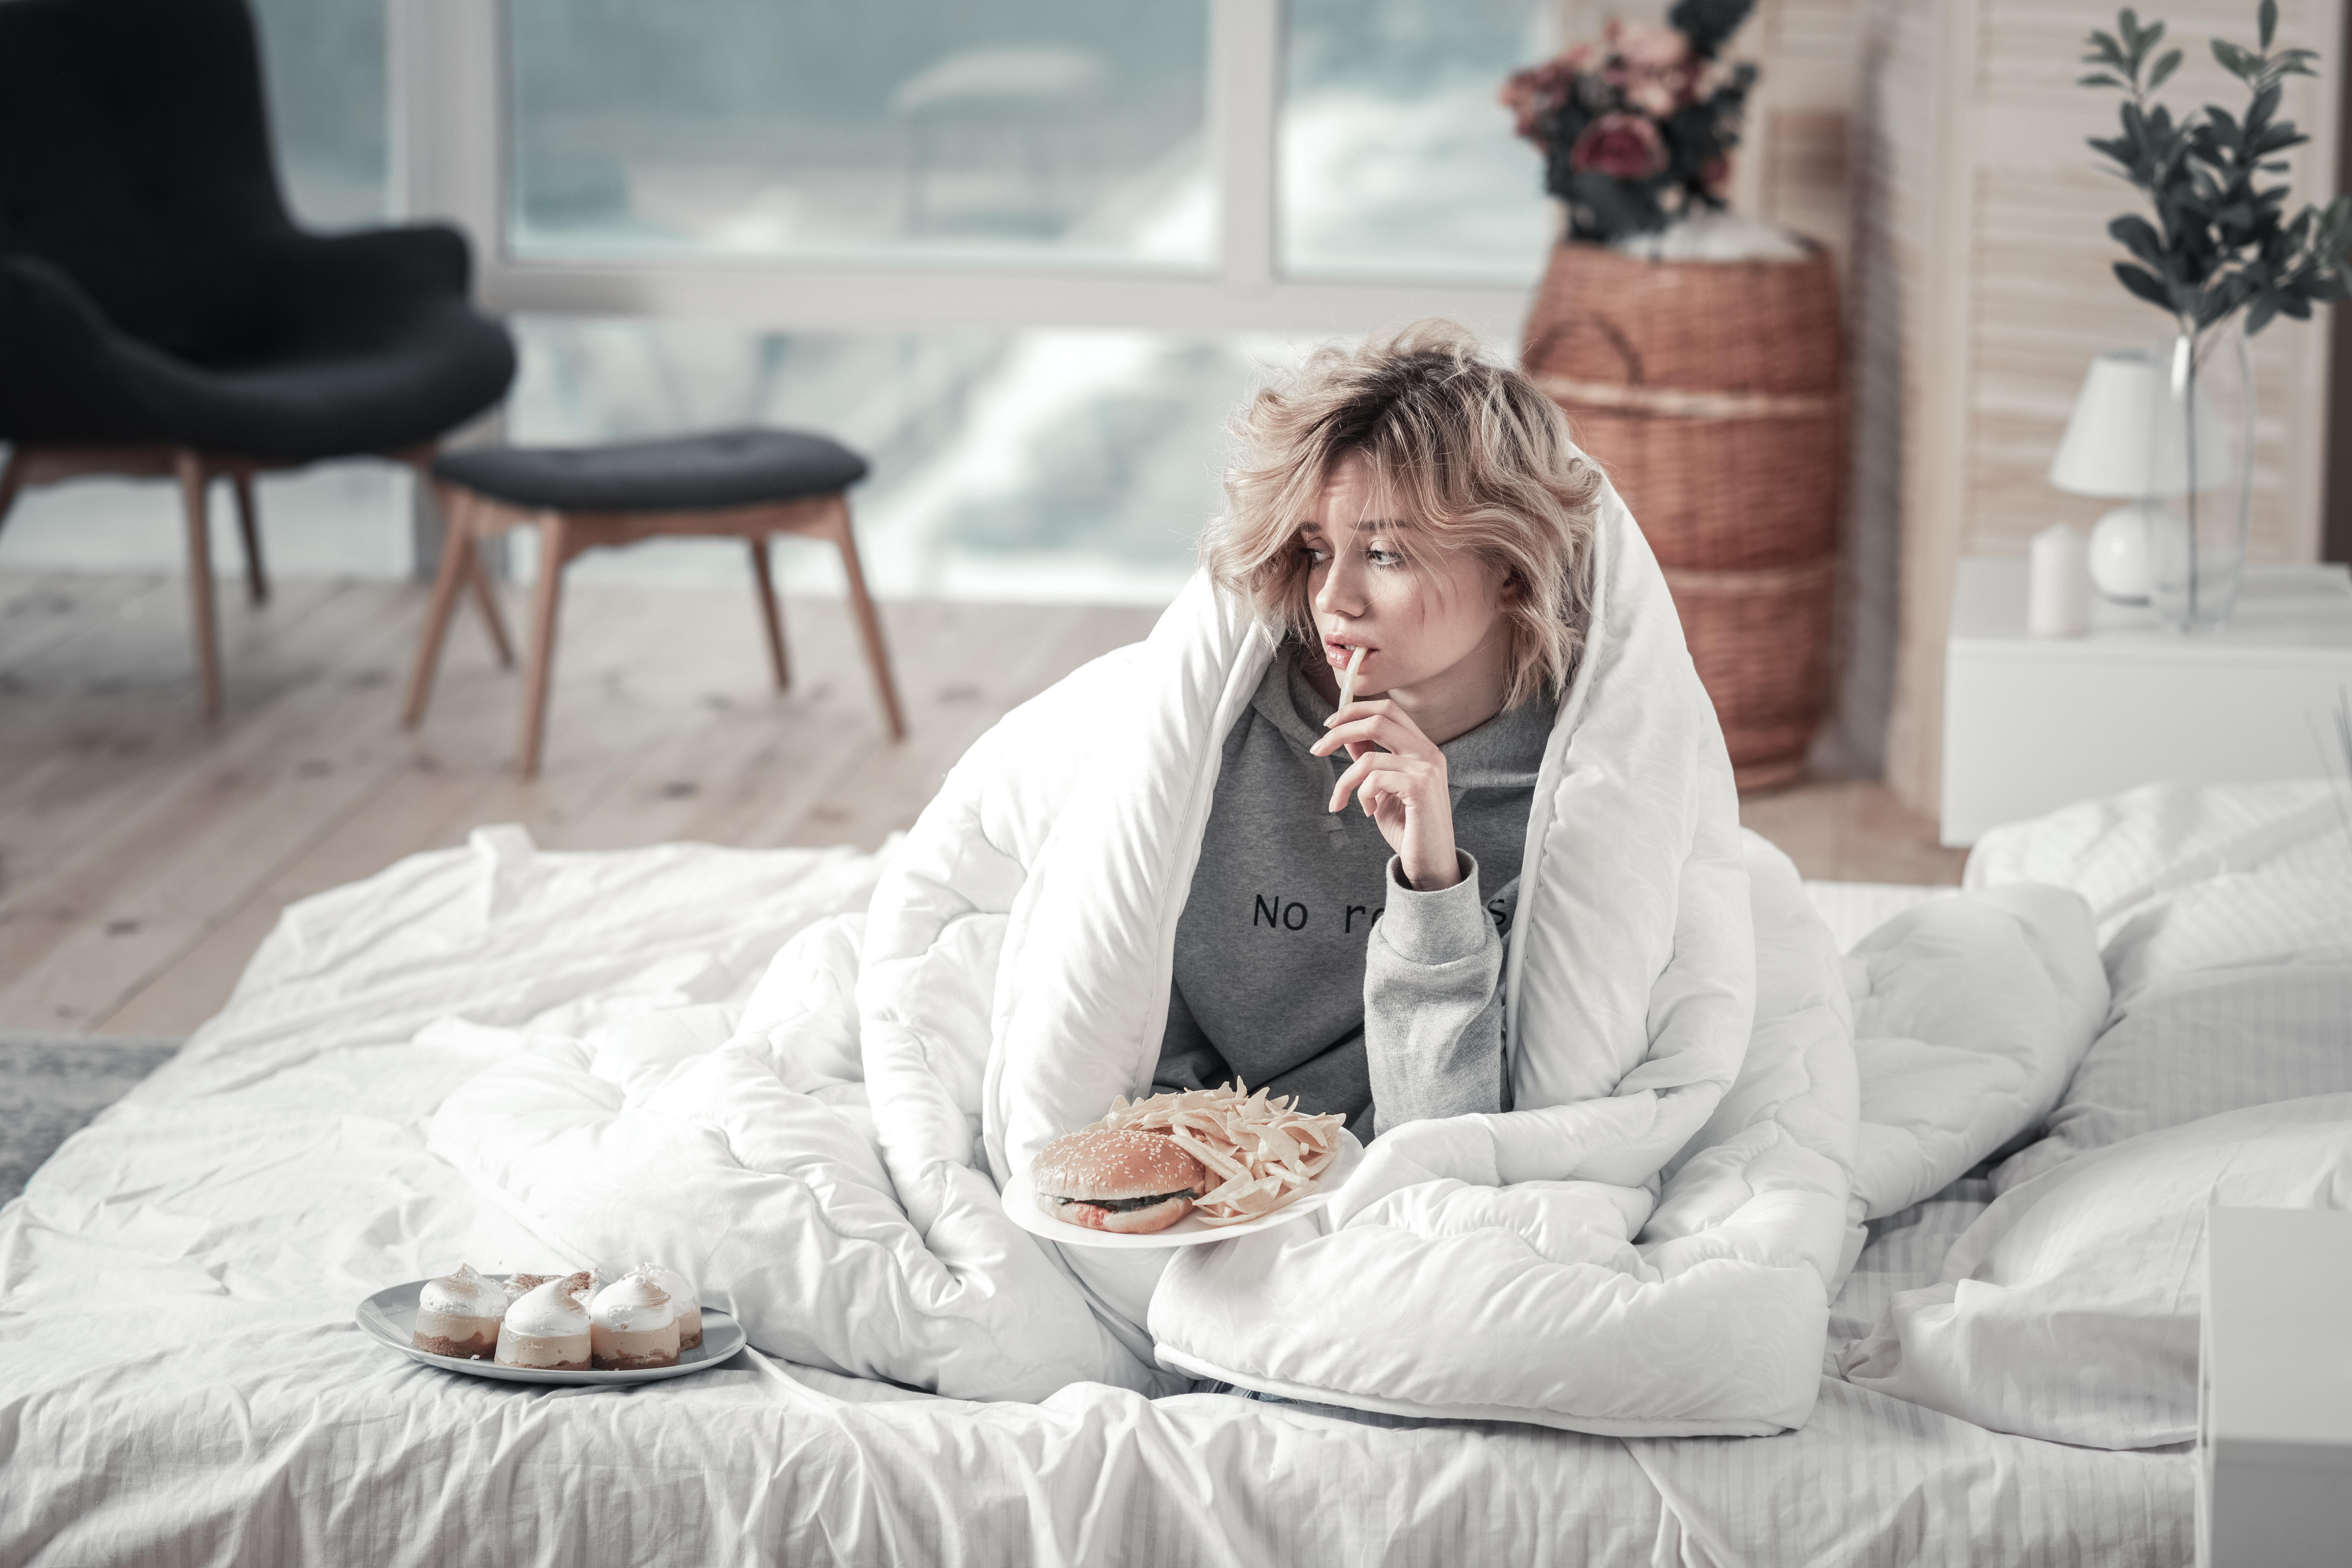 T1J40E Woman eating junk food in her bed after breakup with boyfriend